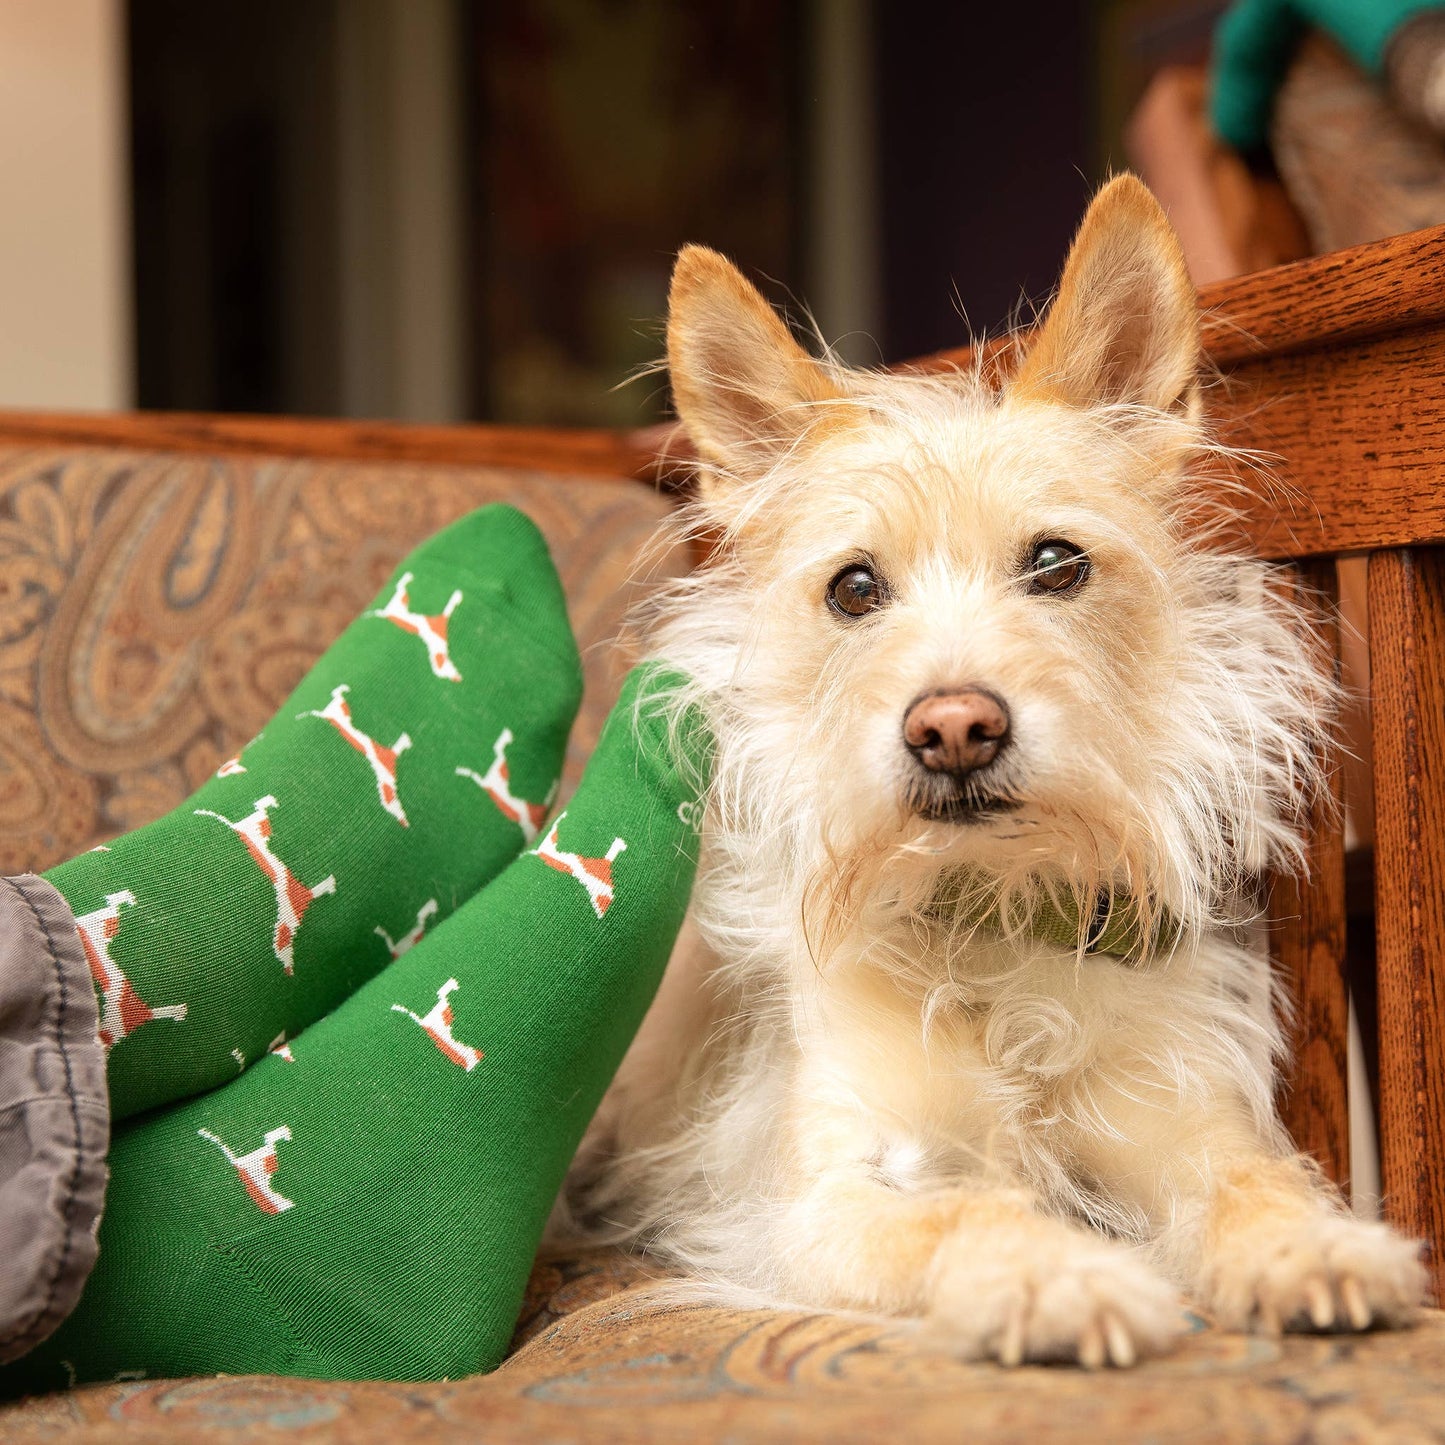 Socks that Save Dogs (Green Dogs): Small